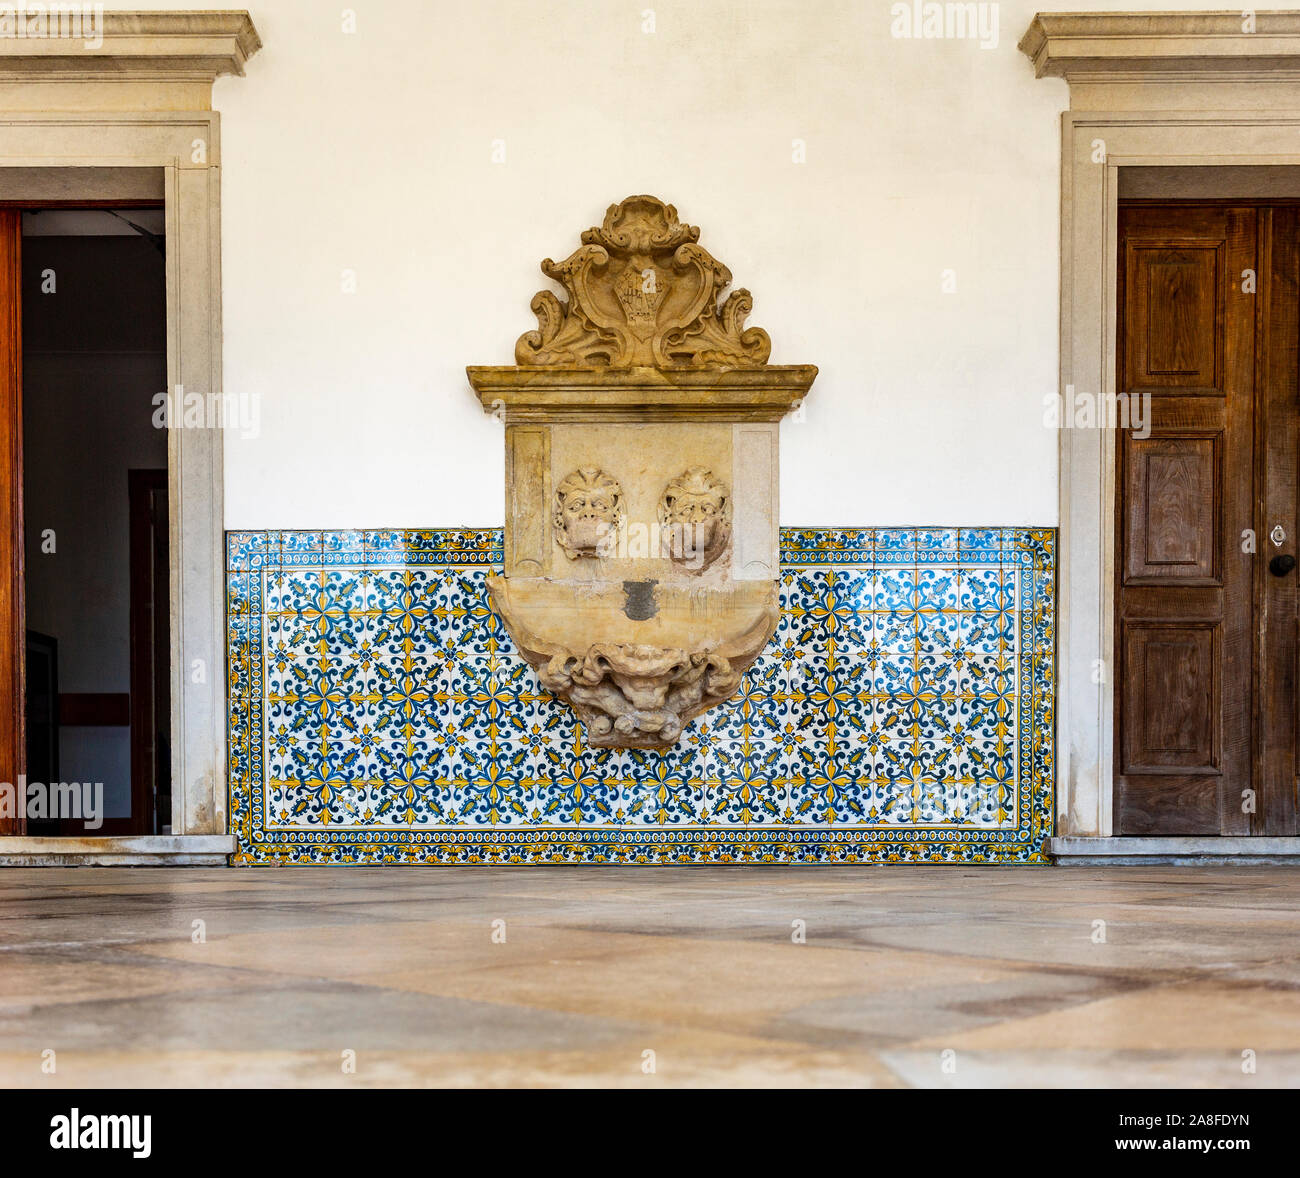 View of the ruined water fountain in the portico of the former Priests House of the Monastery of Saint Mary of Lorvao, Coimbra, Portugal Stock Photo